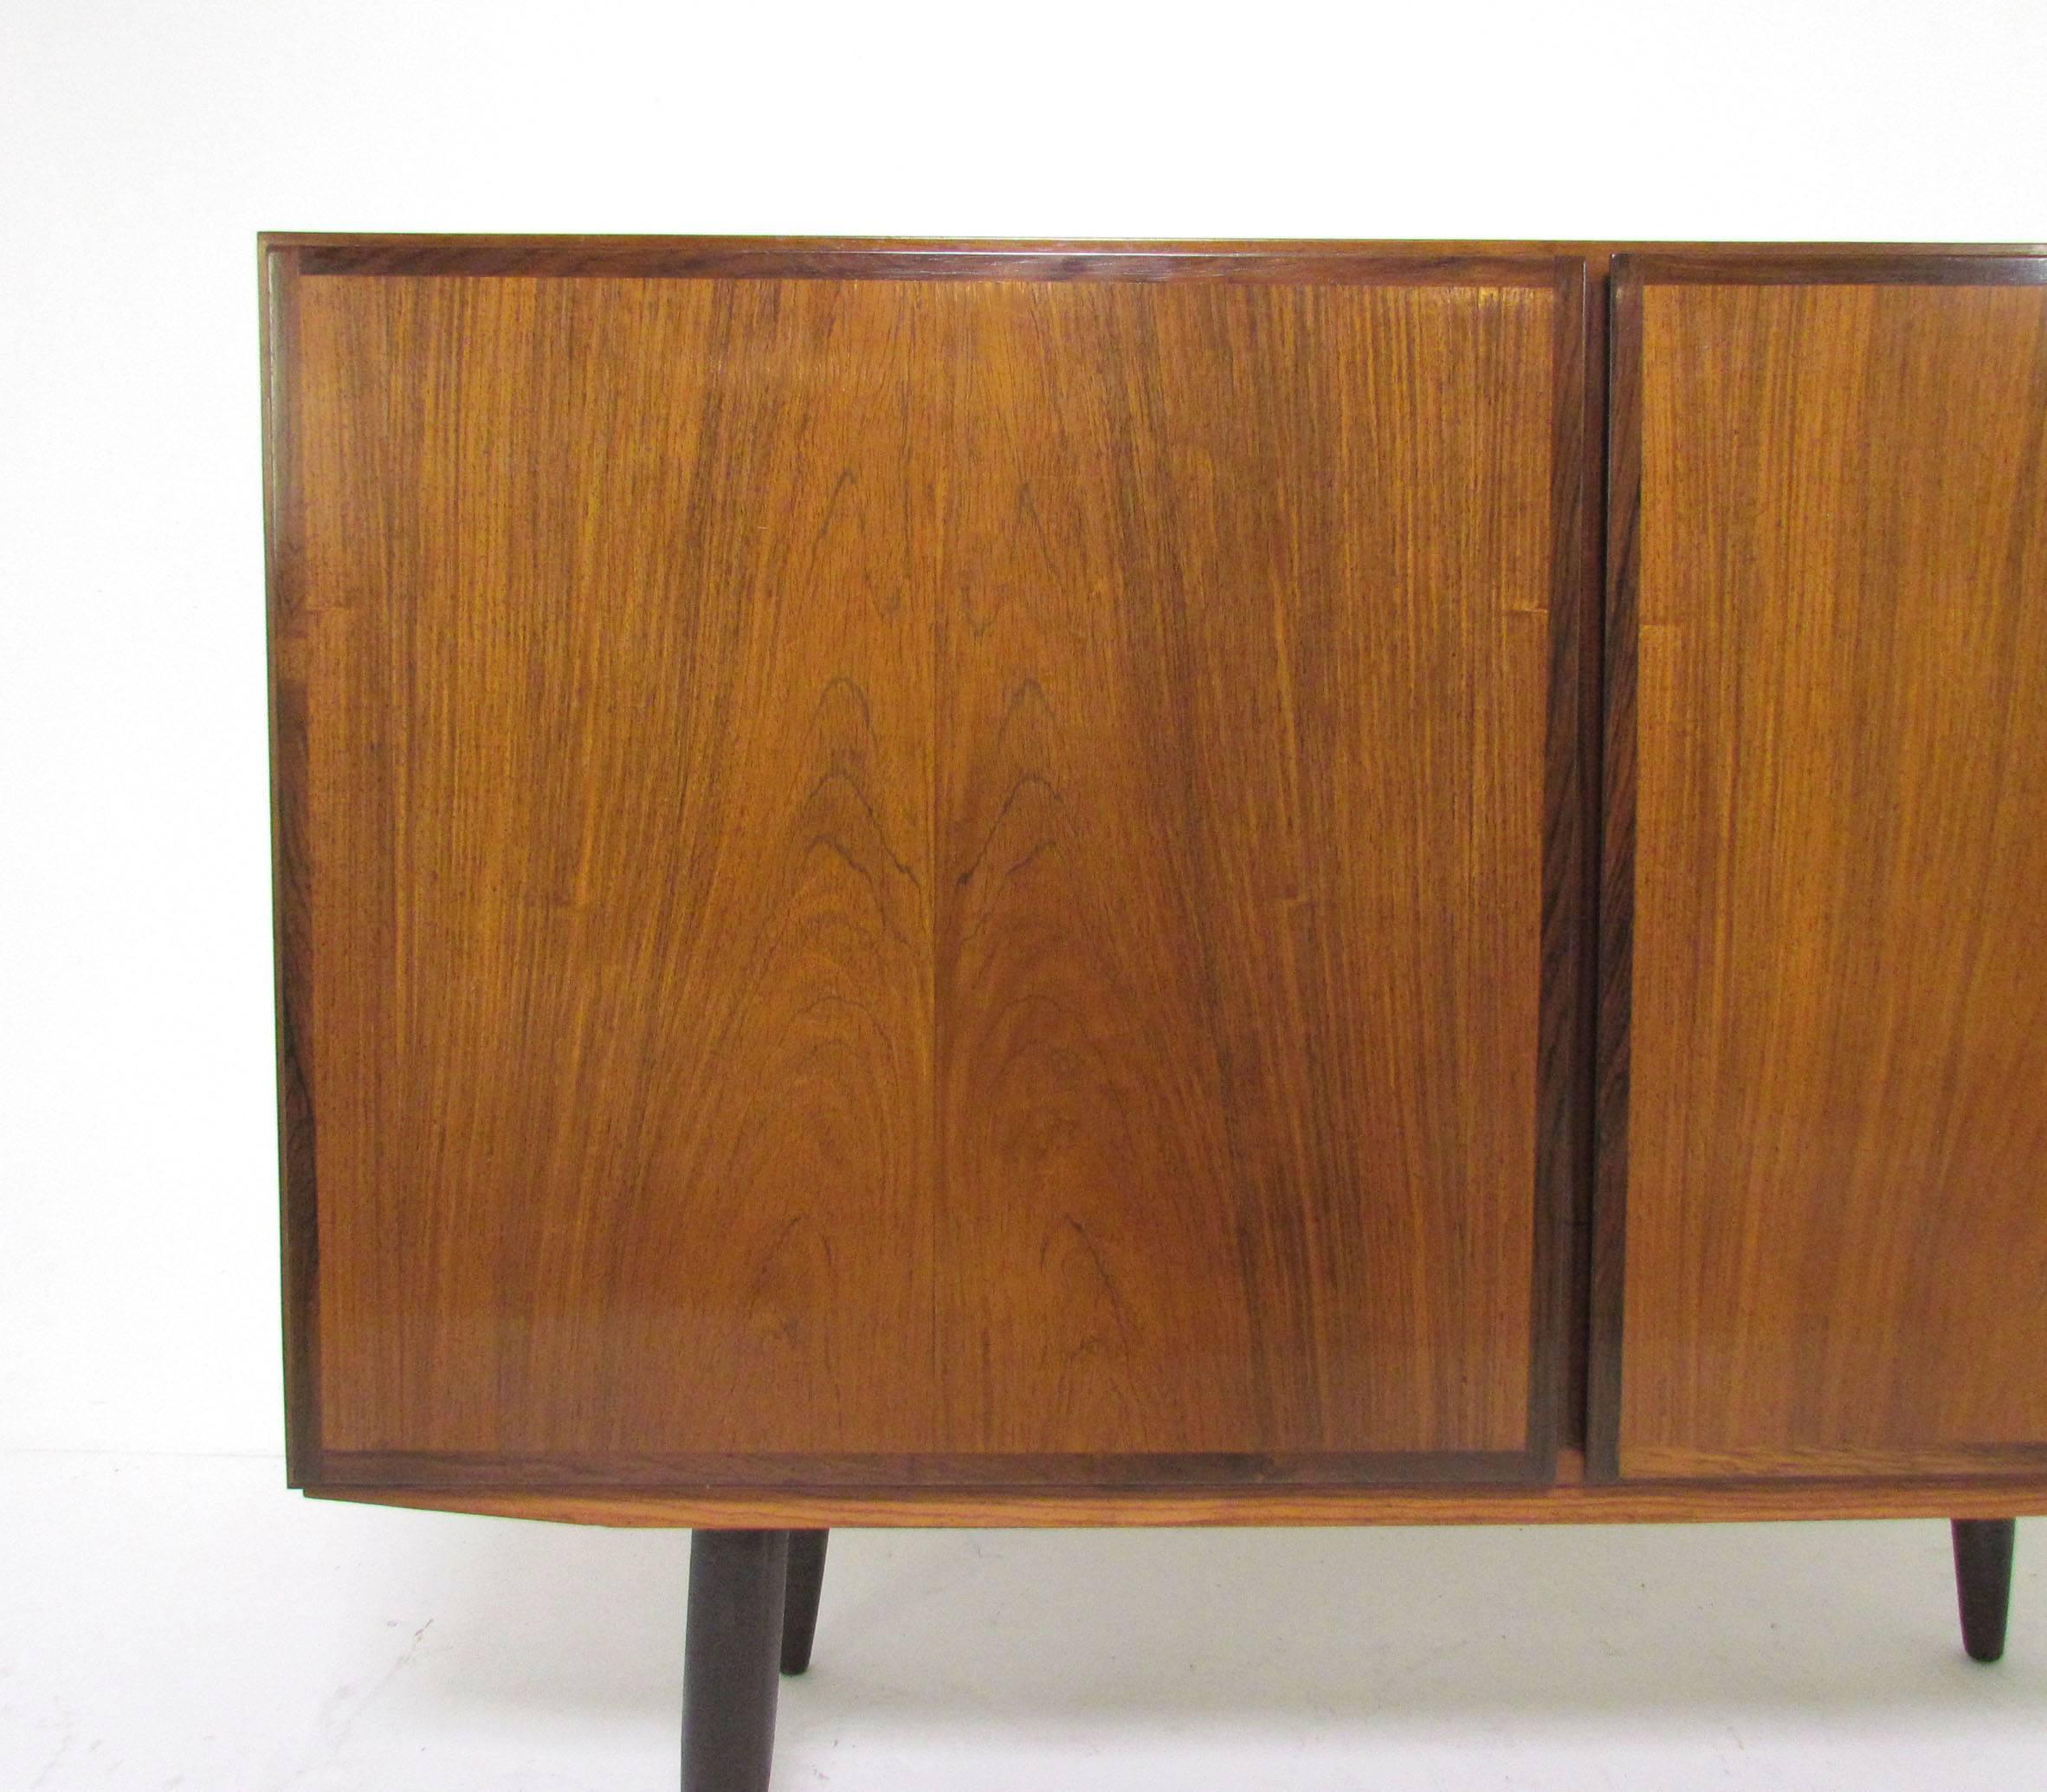 Rosewood two-door sideboard by Gunni Omann for Omann Jun, Denmark, circa 1960s. Features two shallow flatware drawers and adjustable shelves, great size to use as a media cabinet.